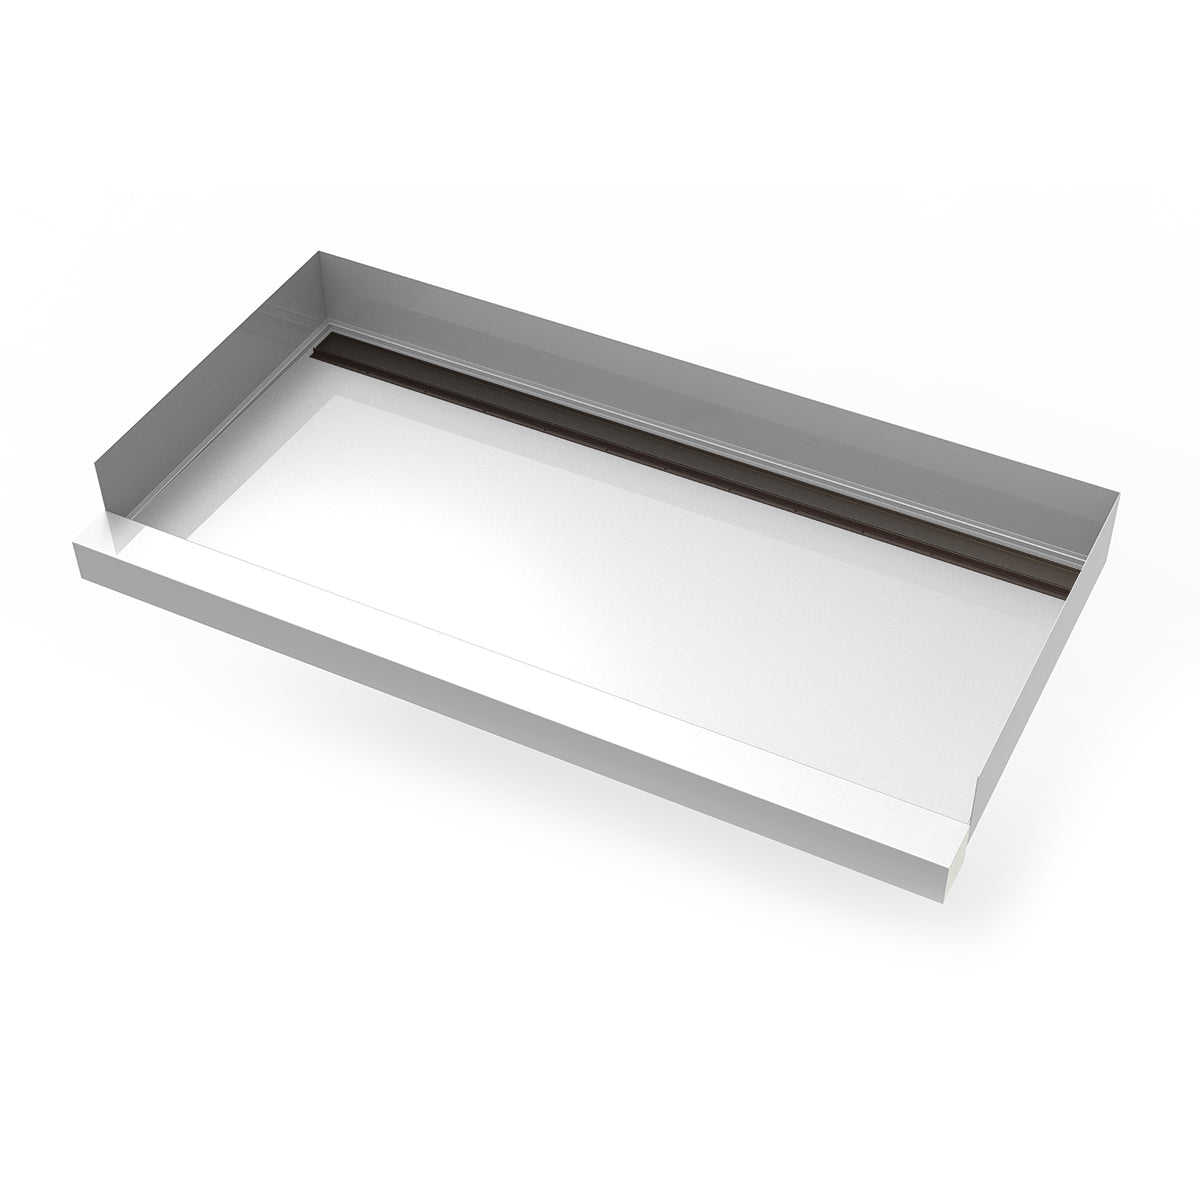 Infinity Drain 30"x 60" Stainless Steel Shower Base with Back Wall Tile Insert Linear Drain location